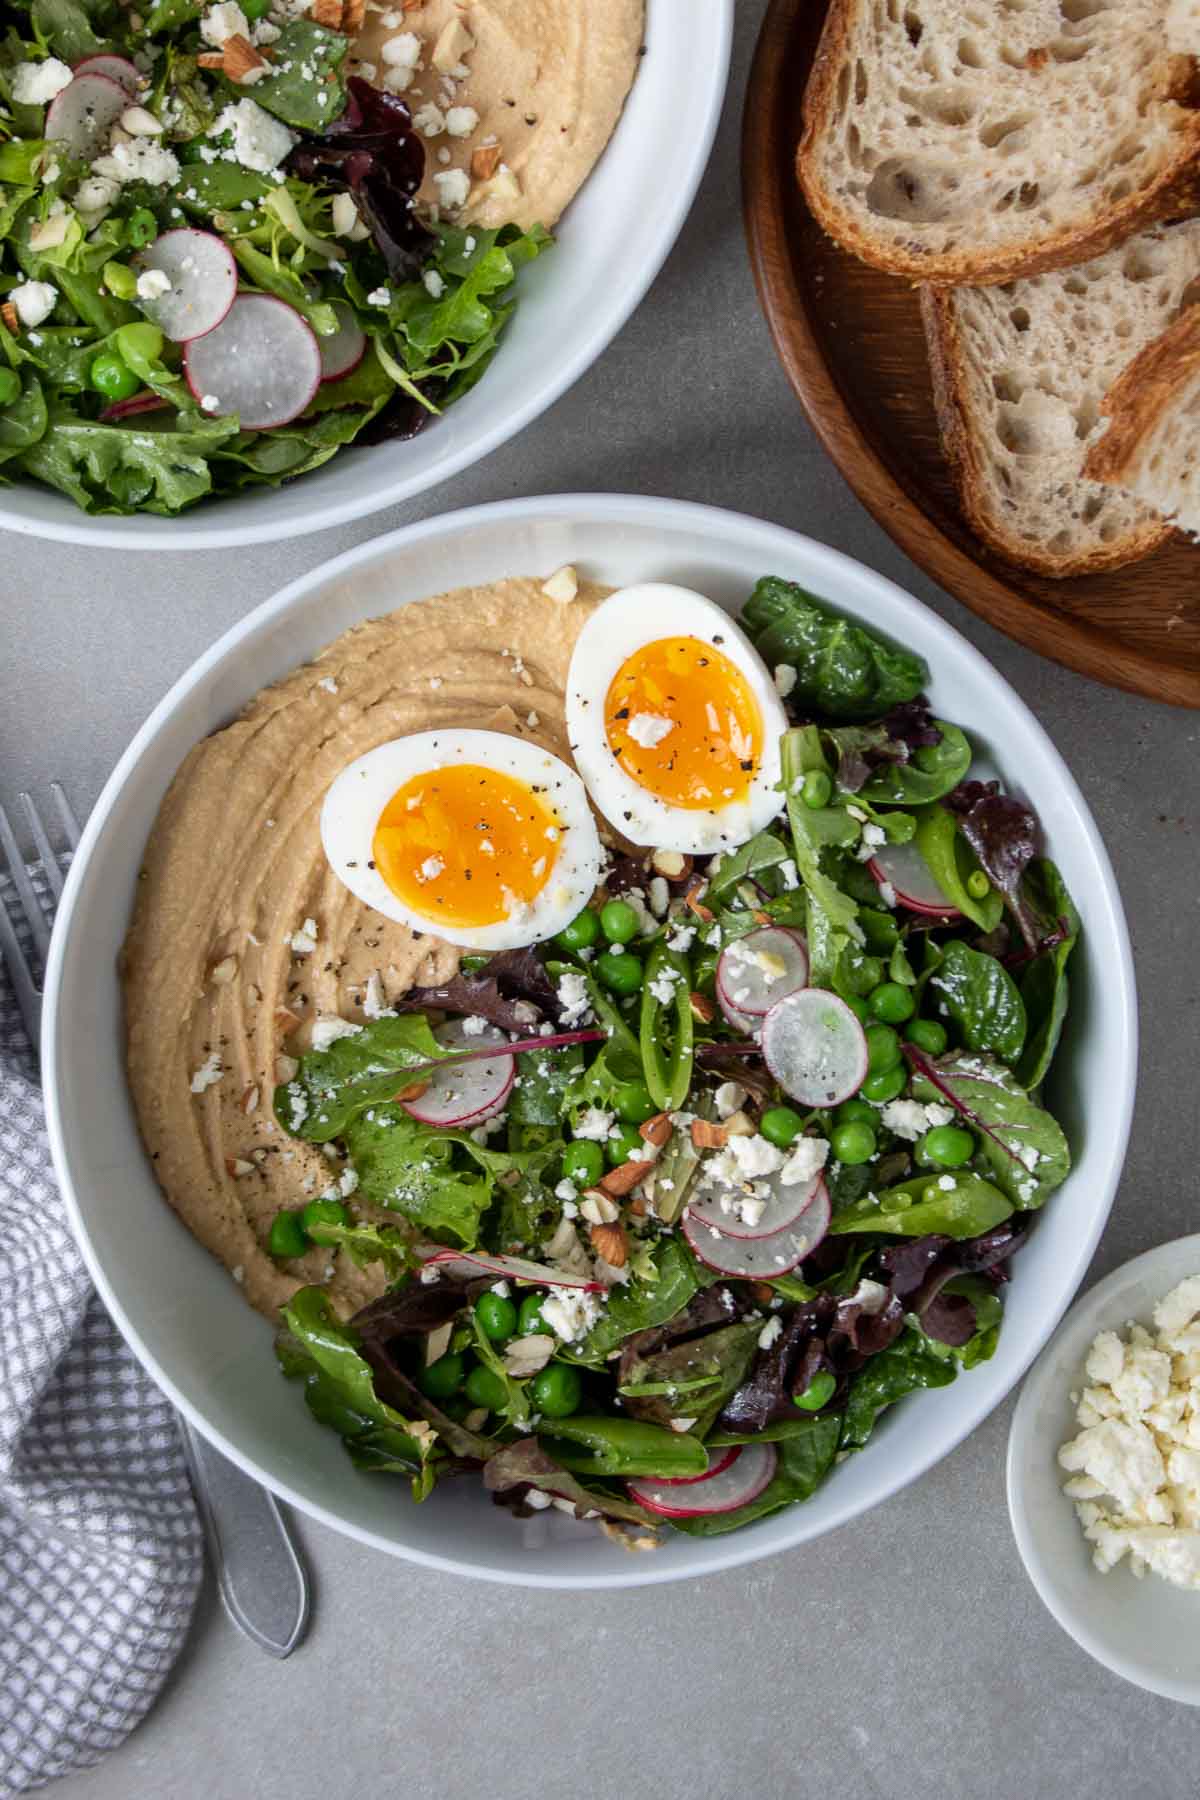 Overhead image of bowl with spread of hummus, topped with salad, a jammy 8-minute egg, feta cheese, and chopped almonds, salt, and pepper, with a side of sourdough bread.